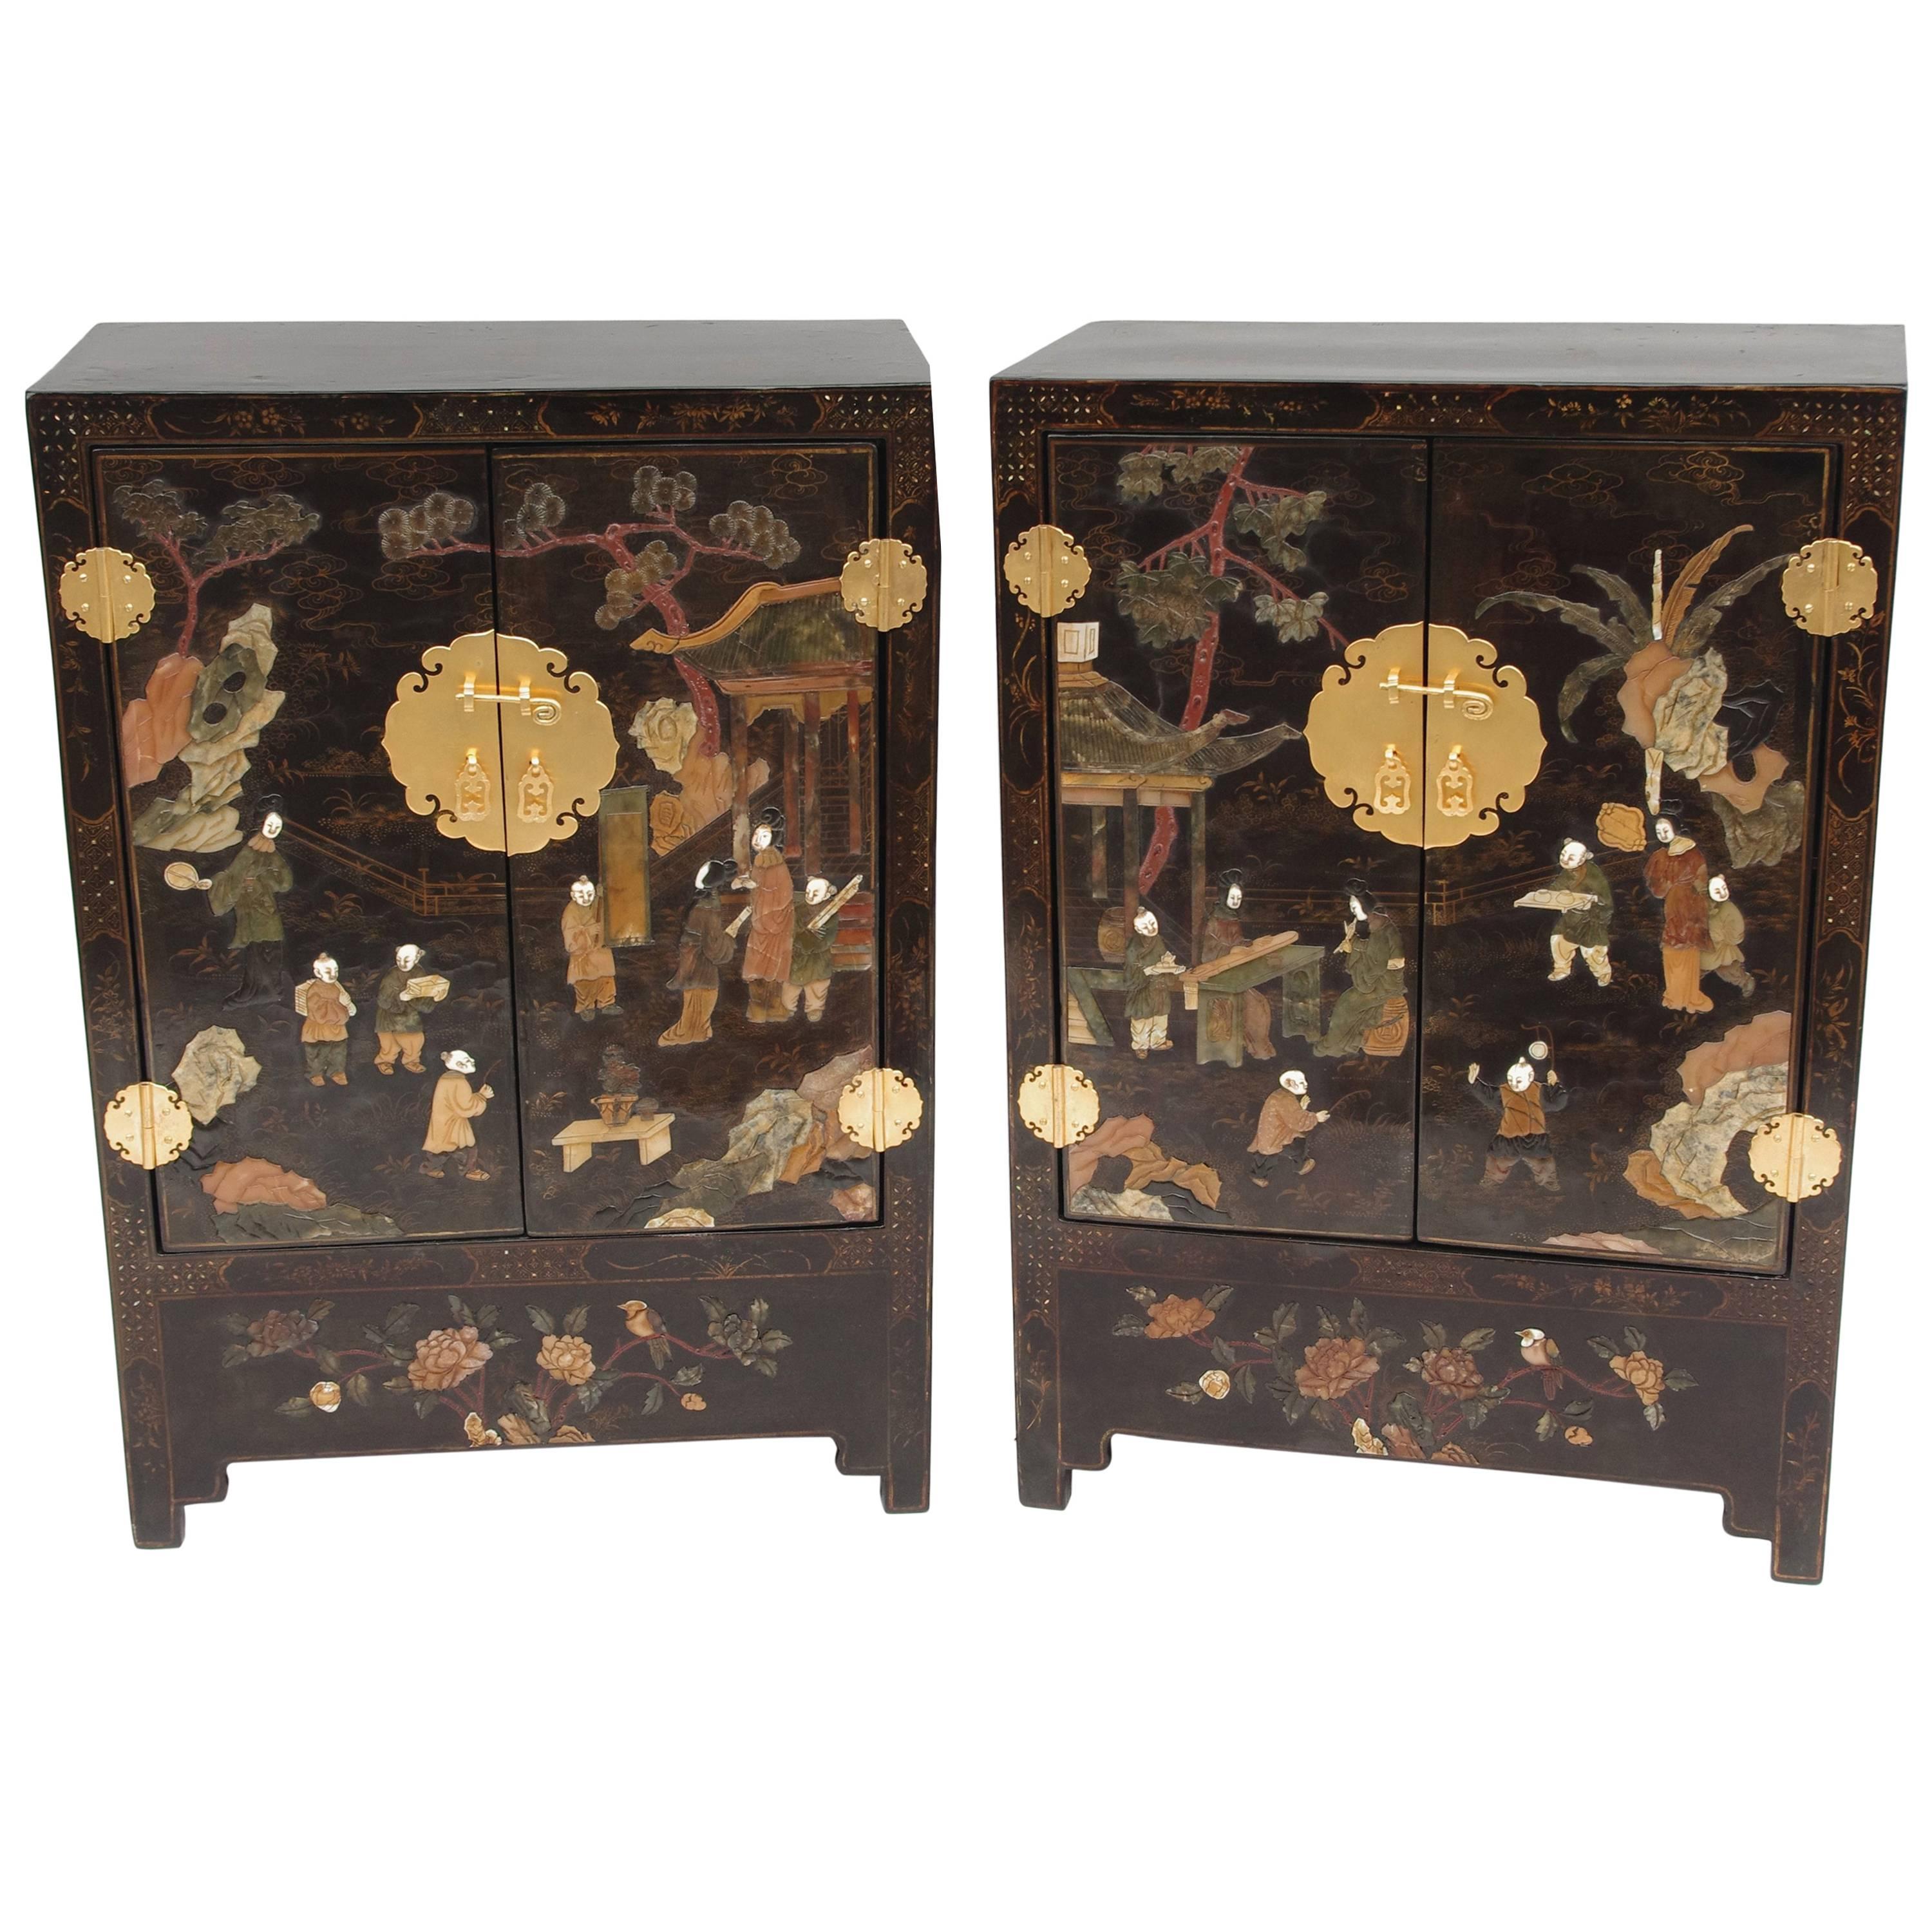 Pair of Lacquered Nightstands with Hard Stones Inlays, circa 1900